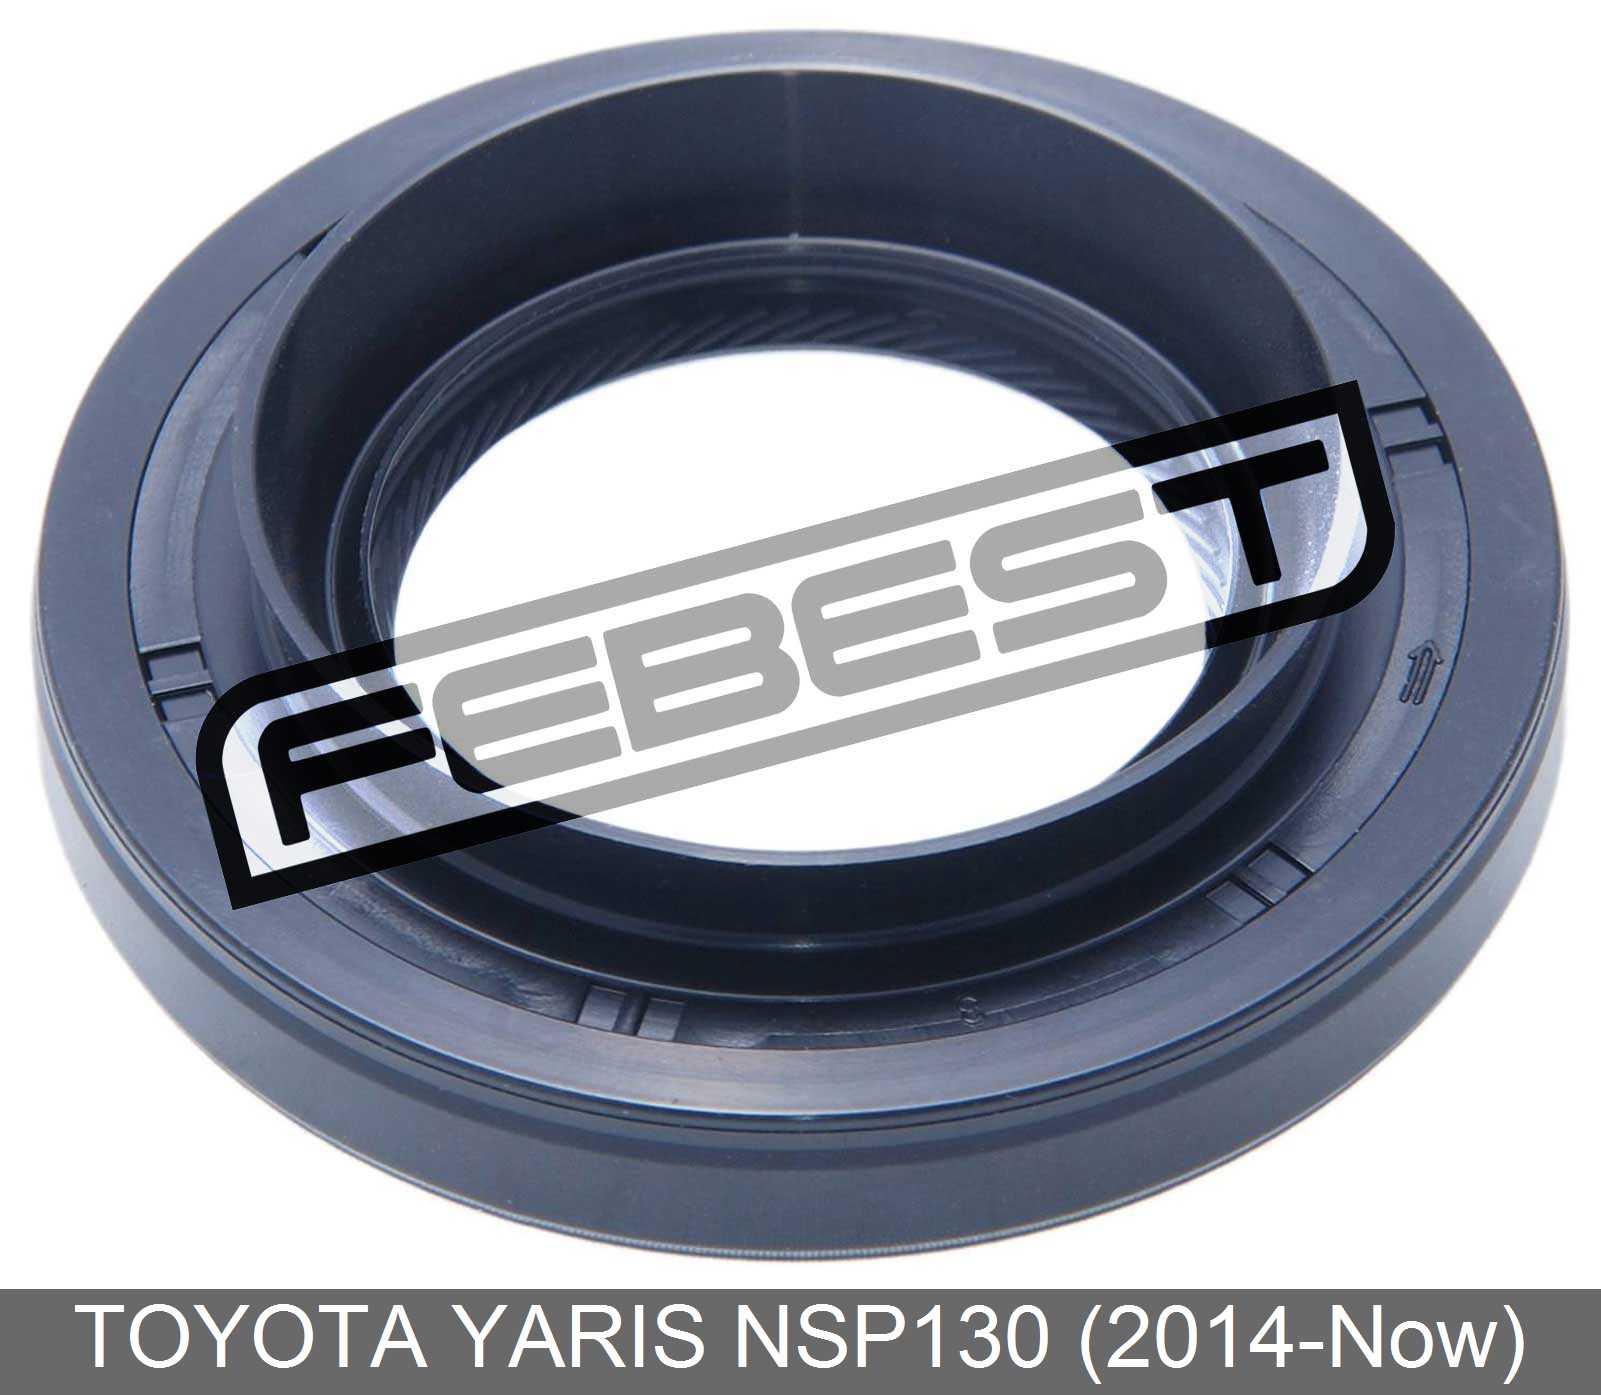 TOYOTA 95HBY-35630915L_NC Product Photo